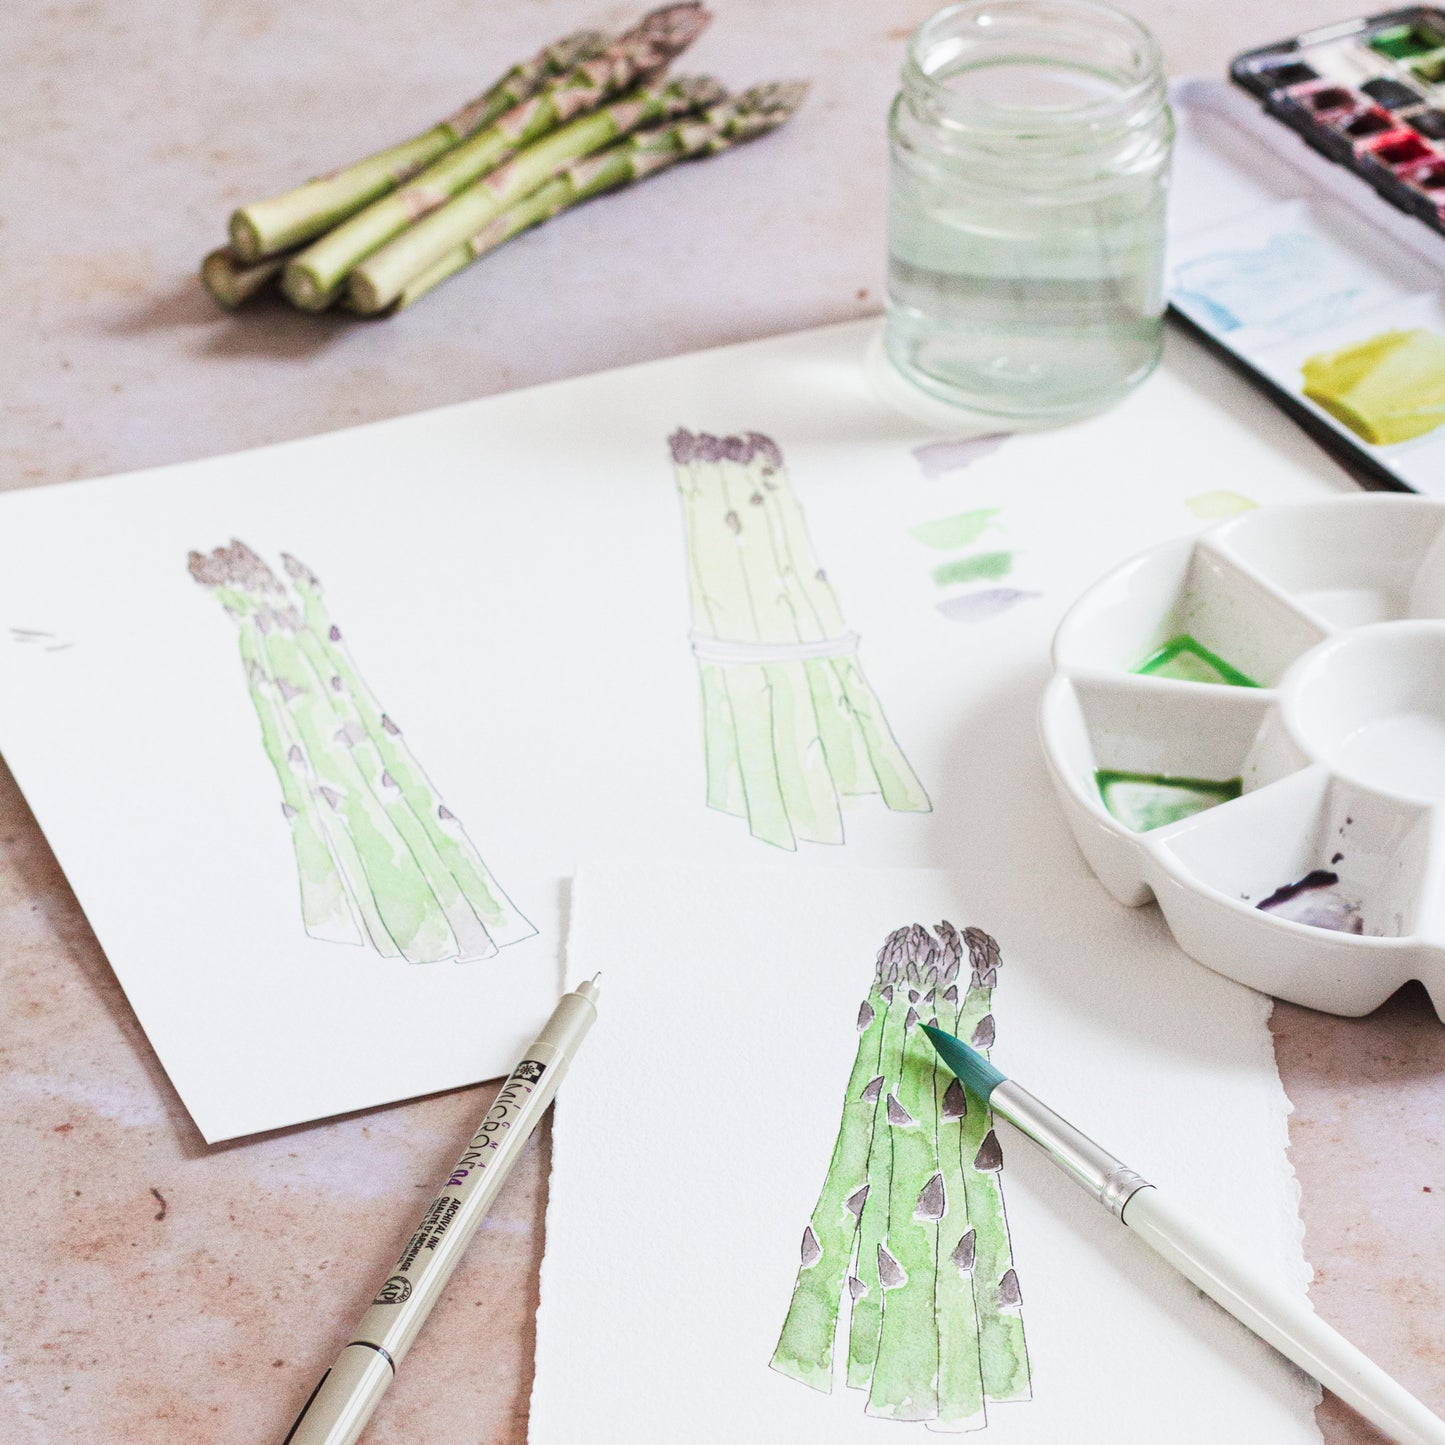 Process of making a watercolour illustrated fruit and vegetable calendar showing painted asparagus with the watercolour setup